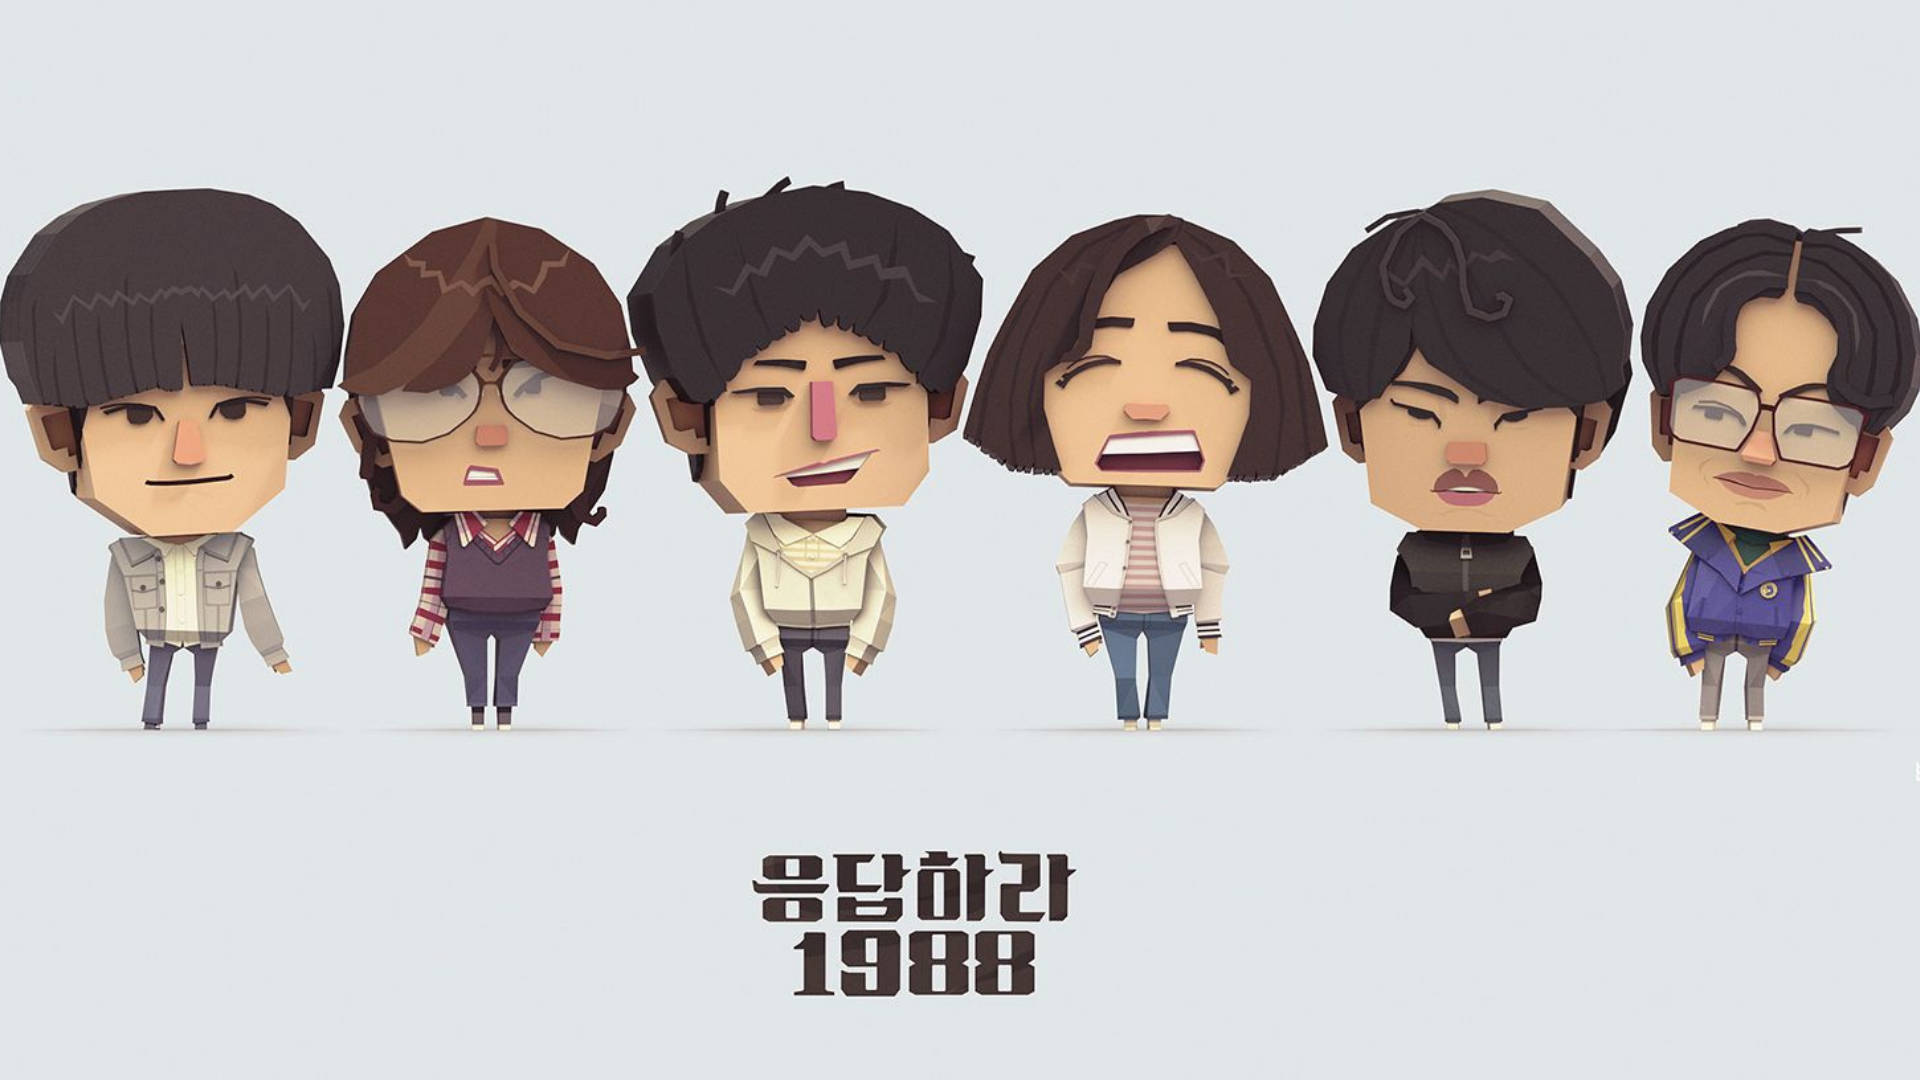 Free Reply 1988 Wallpaper Downloads, [100+] Reply 1988 Wallpapers for FREE  